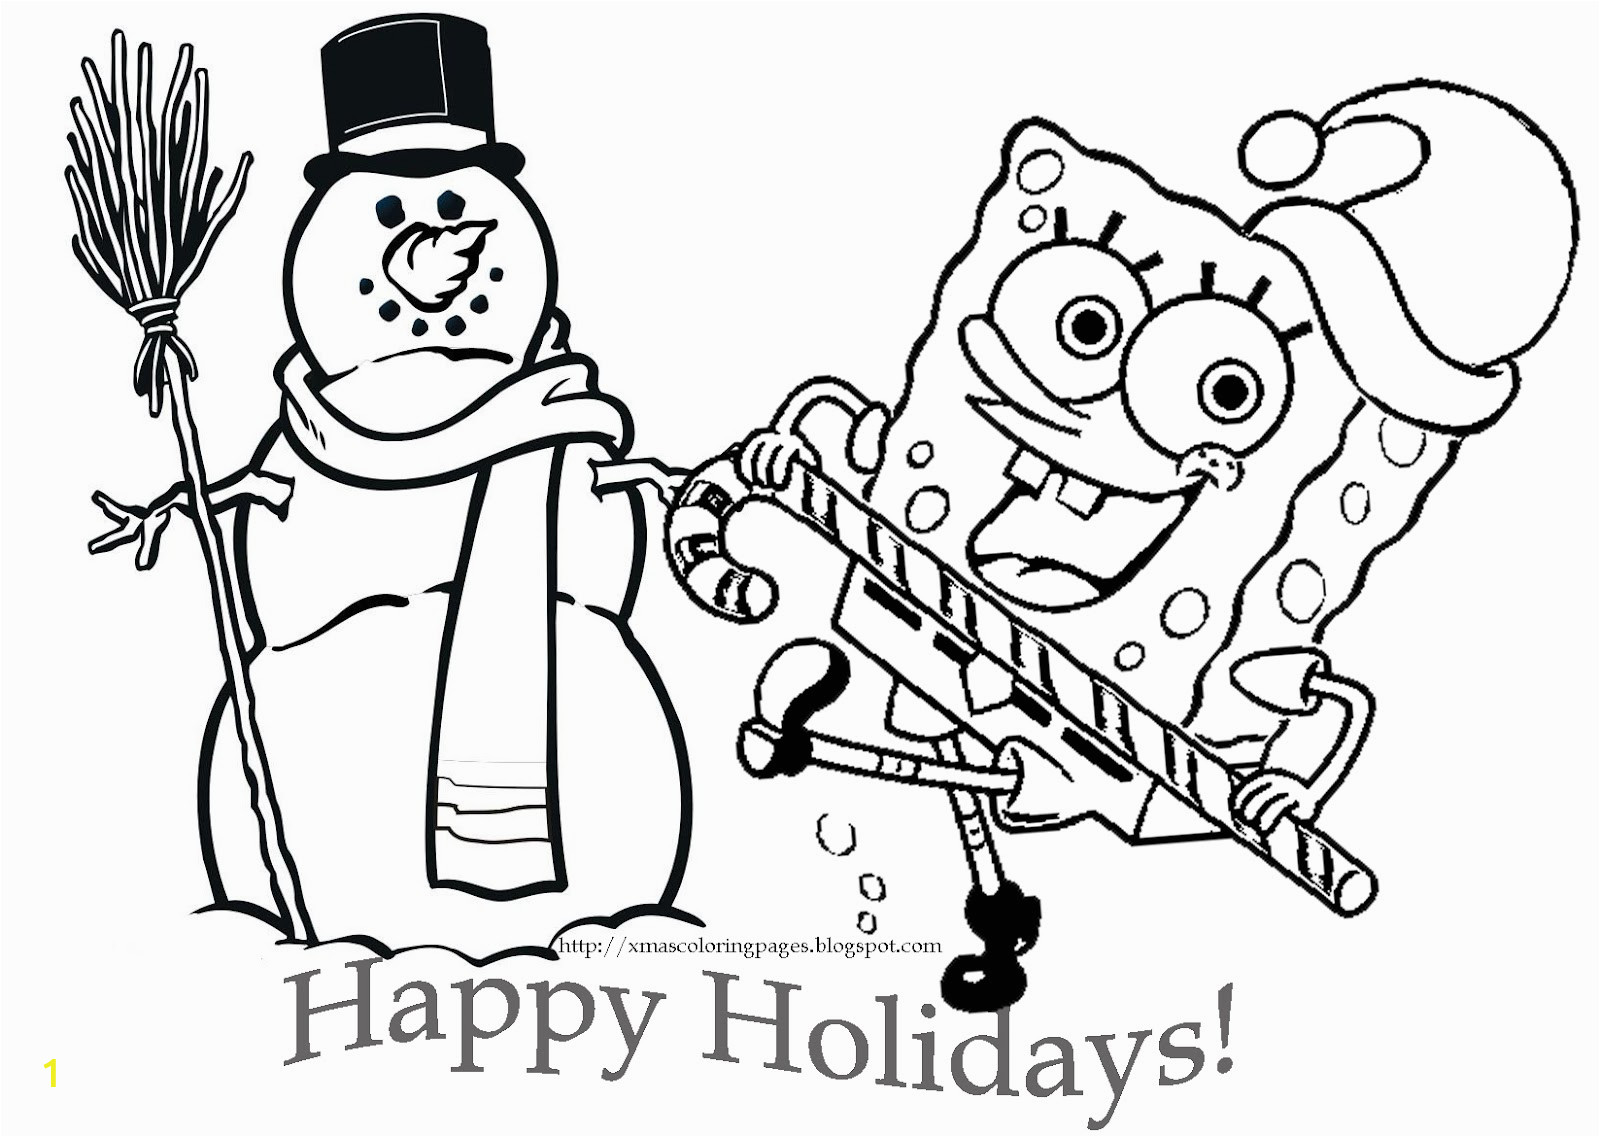 spongebob and patrick coloring pages